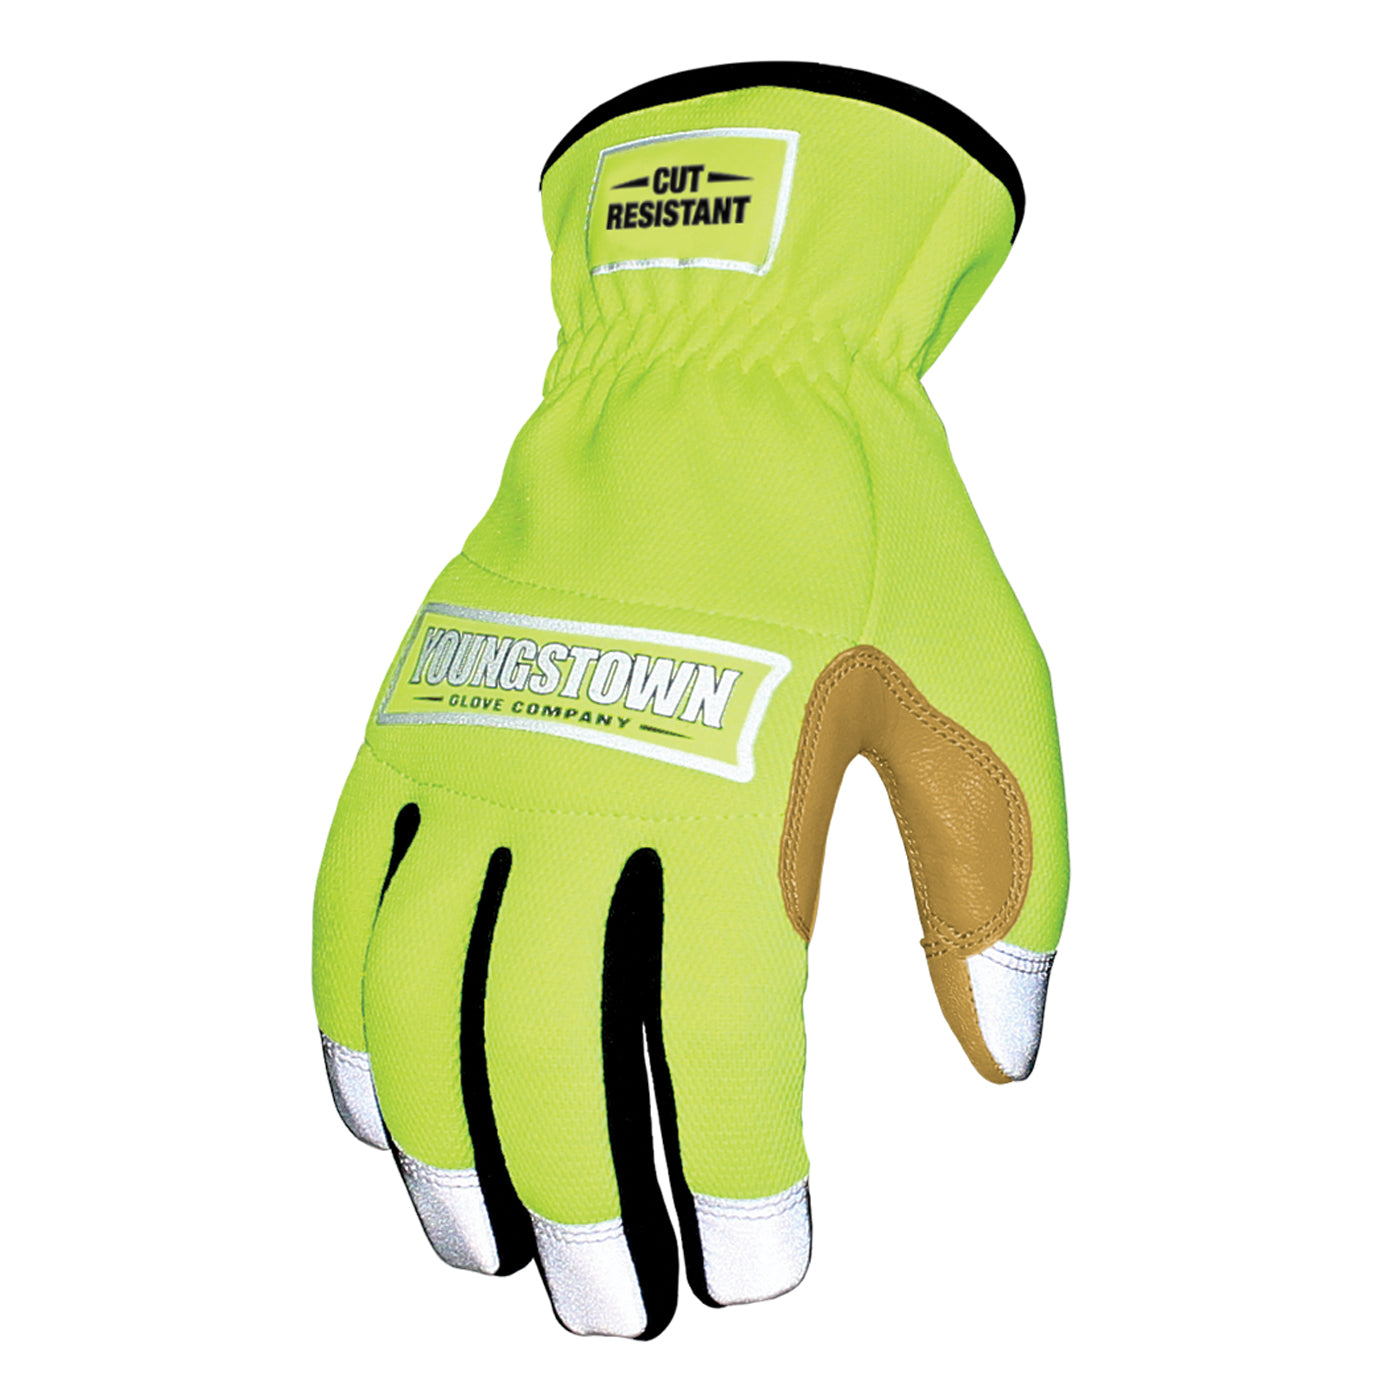 12-3190-10 Youngstown Cut Resistant Safety Lime Hybrid Glove - Main image